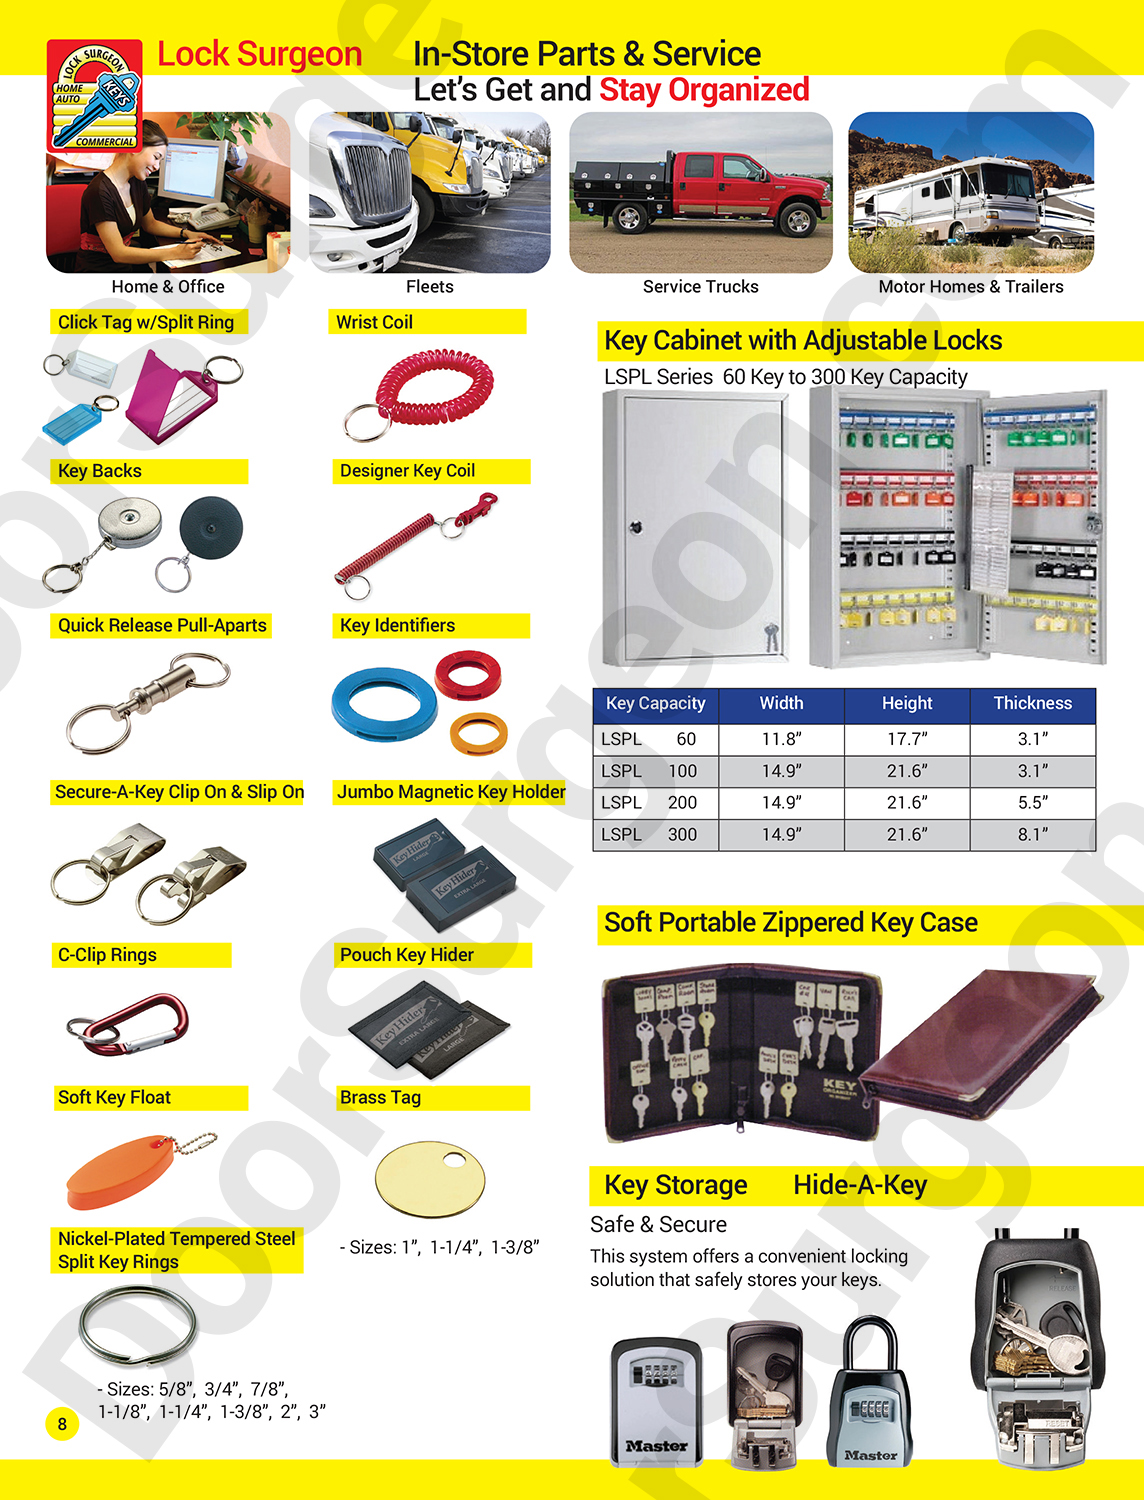 Door Surgeon carry a variety of key organizational products click tags wrist coils key identifiers.